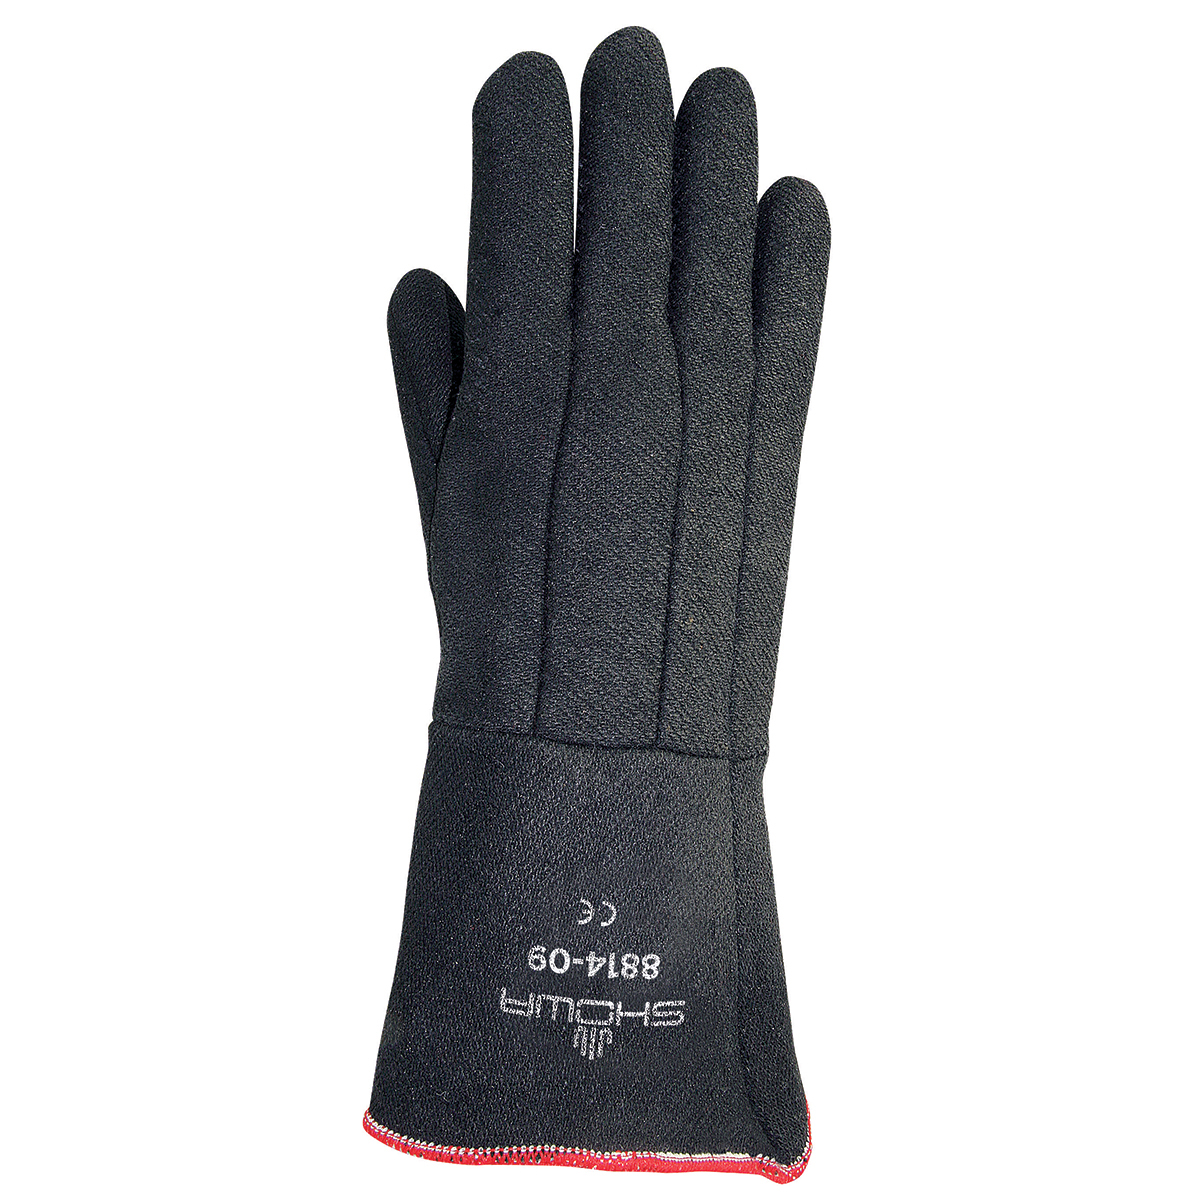 SHOWA® 8814 Size 10 14” Black Non-Woven Heat Resistant Gloves With Gauntlet/Slip-On Cuff And Insulated Lining